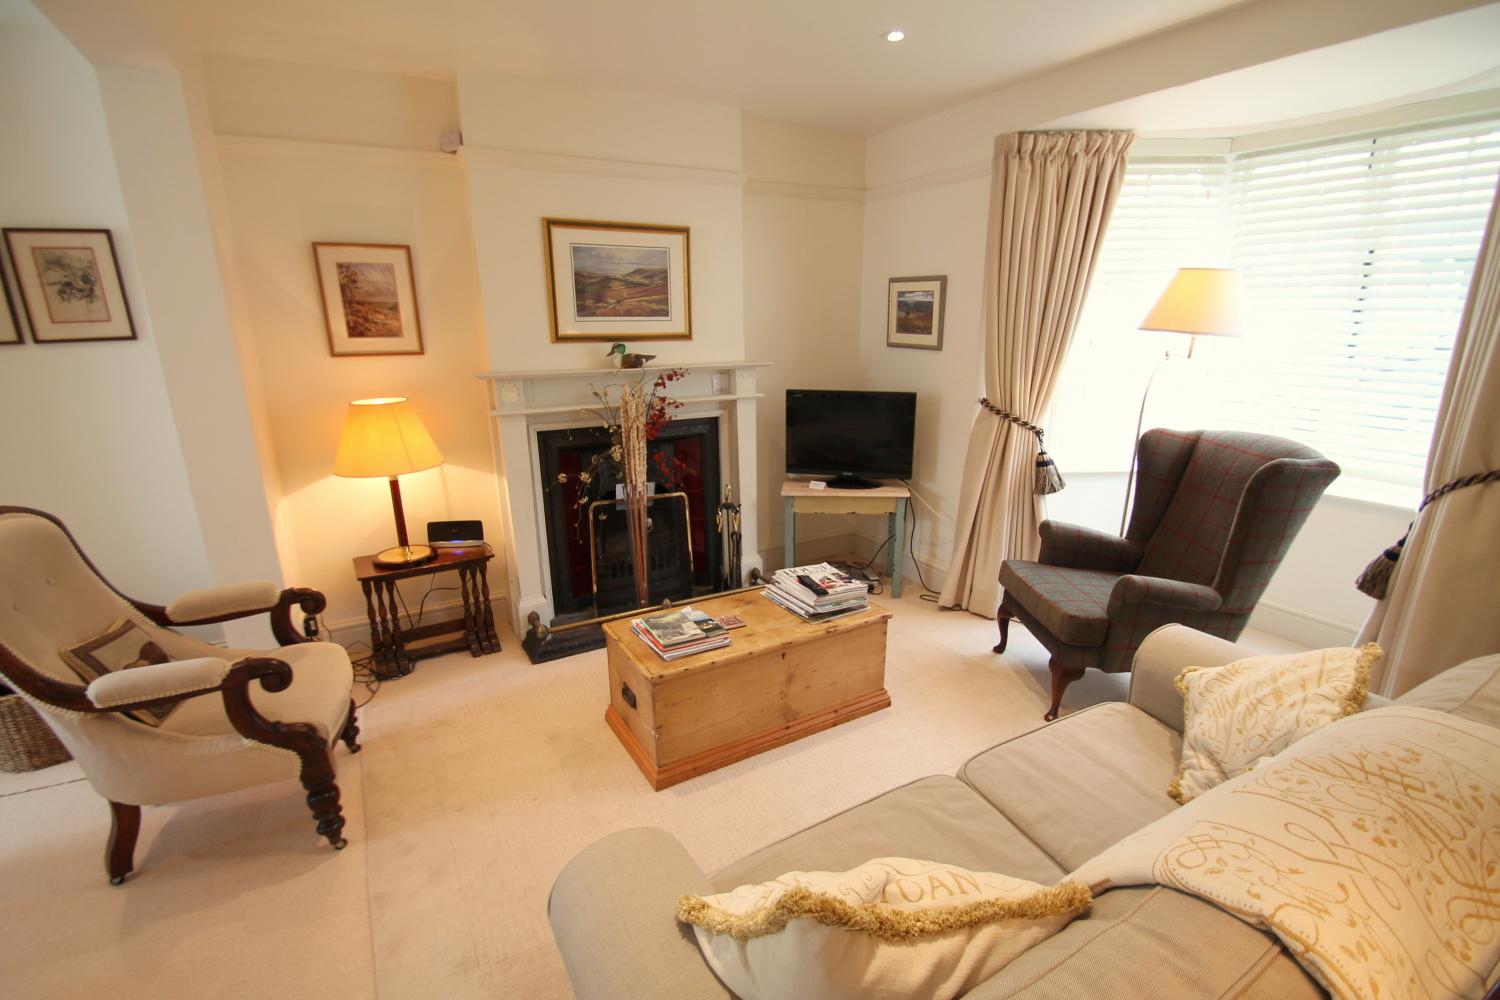 No 4 Lowerbourne comfortable sitting room